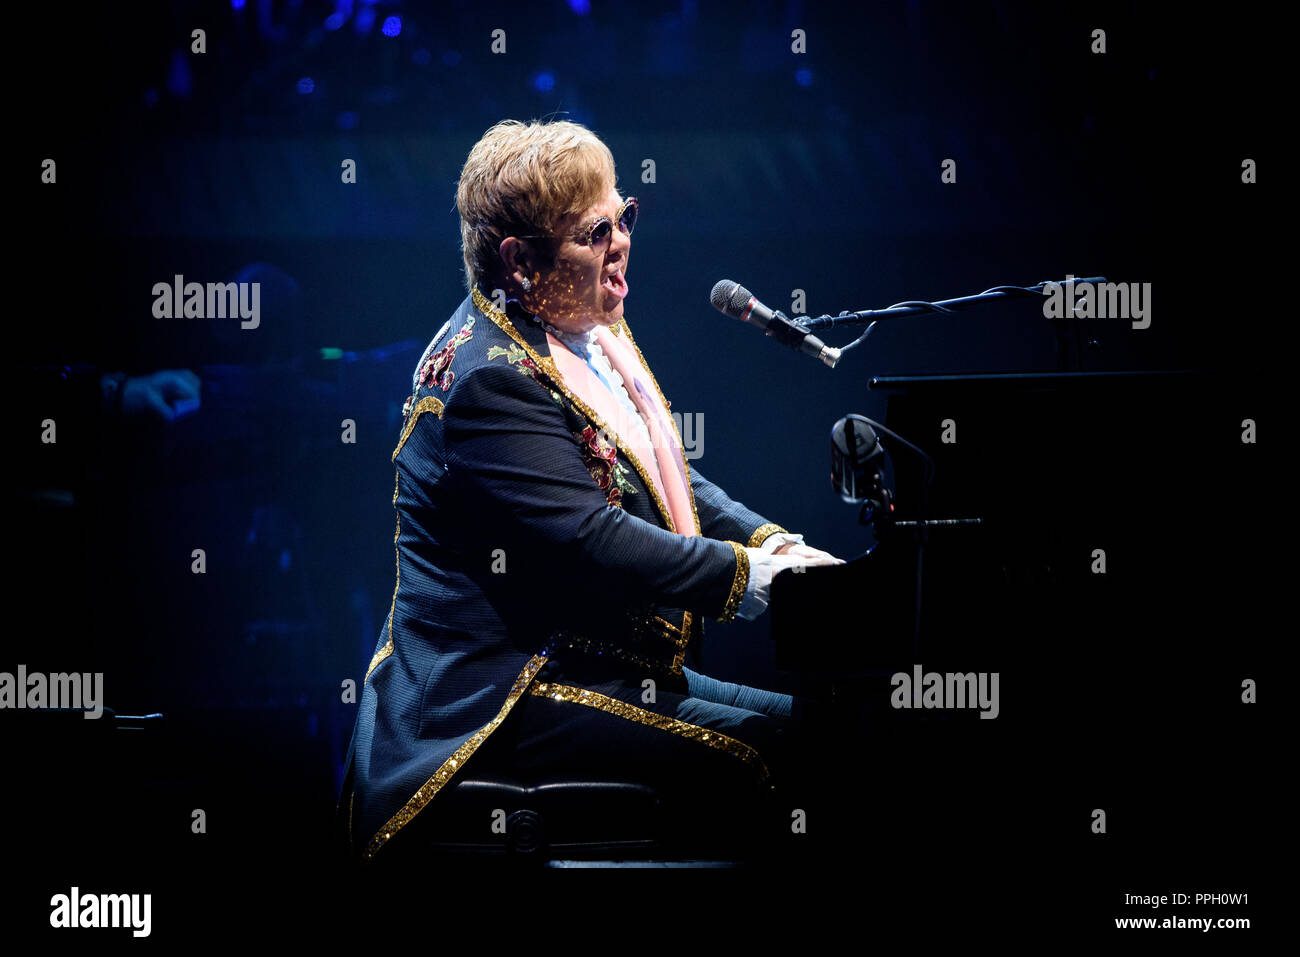 Toronto, Ontario, Canada. 25th Sep, 2018. English singer/songwriter Sir ELTON JOHN performed sold out show as part of his 'Farewell Yellow Brick Road Tour' at Scotiabank Arena in Toronto. Credit: Igor Vidyashev/ZUMA Wire/Alamy Live News Stock Photo